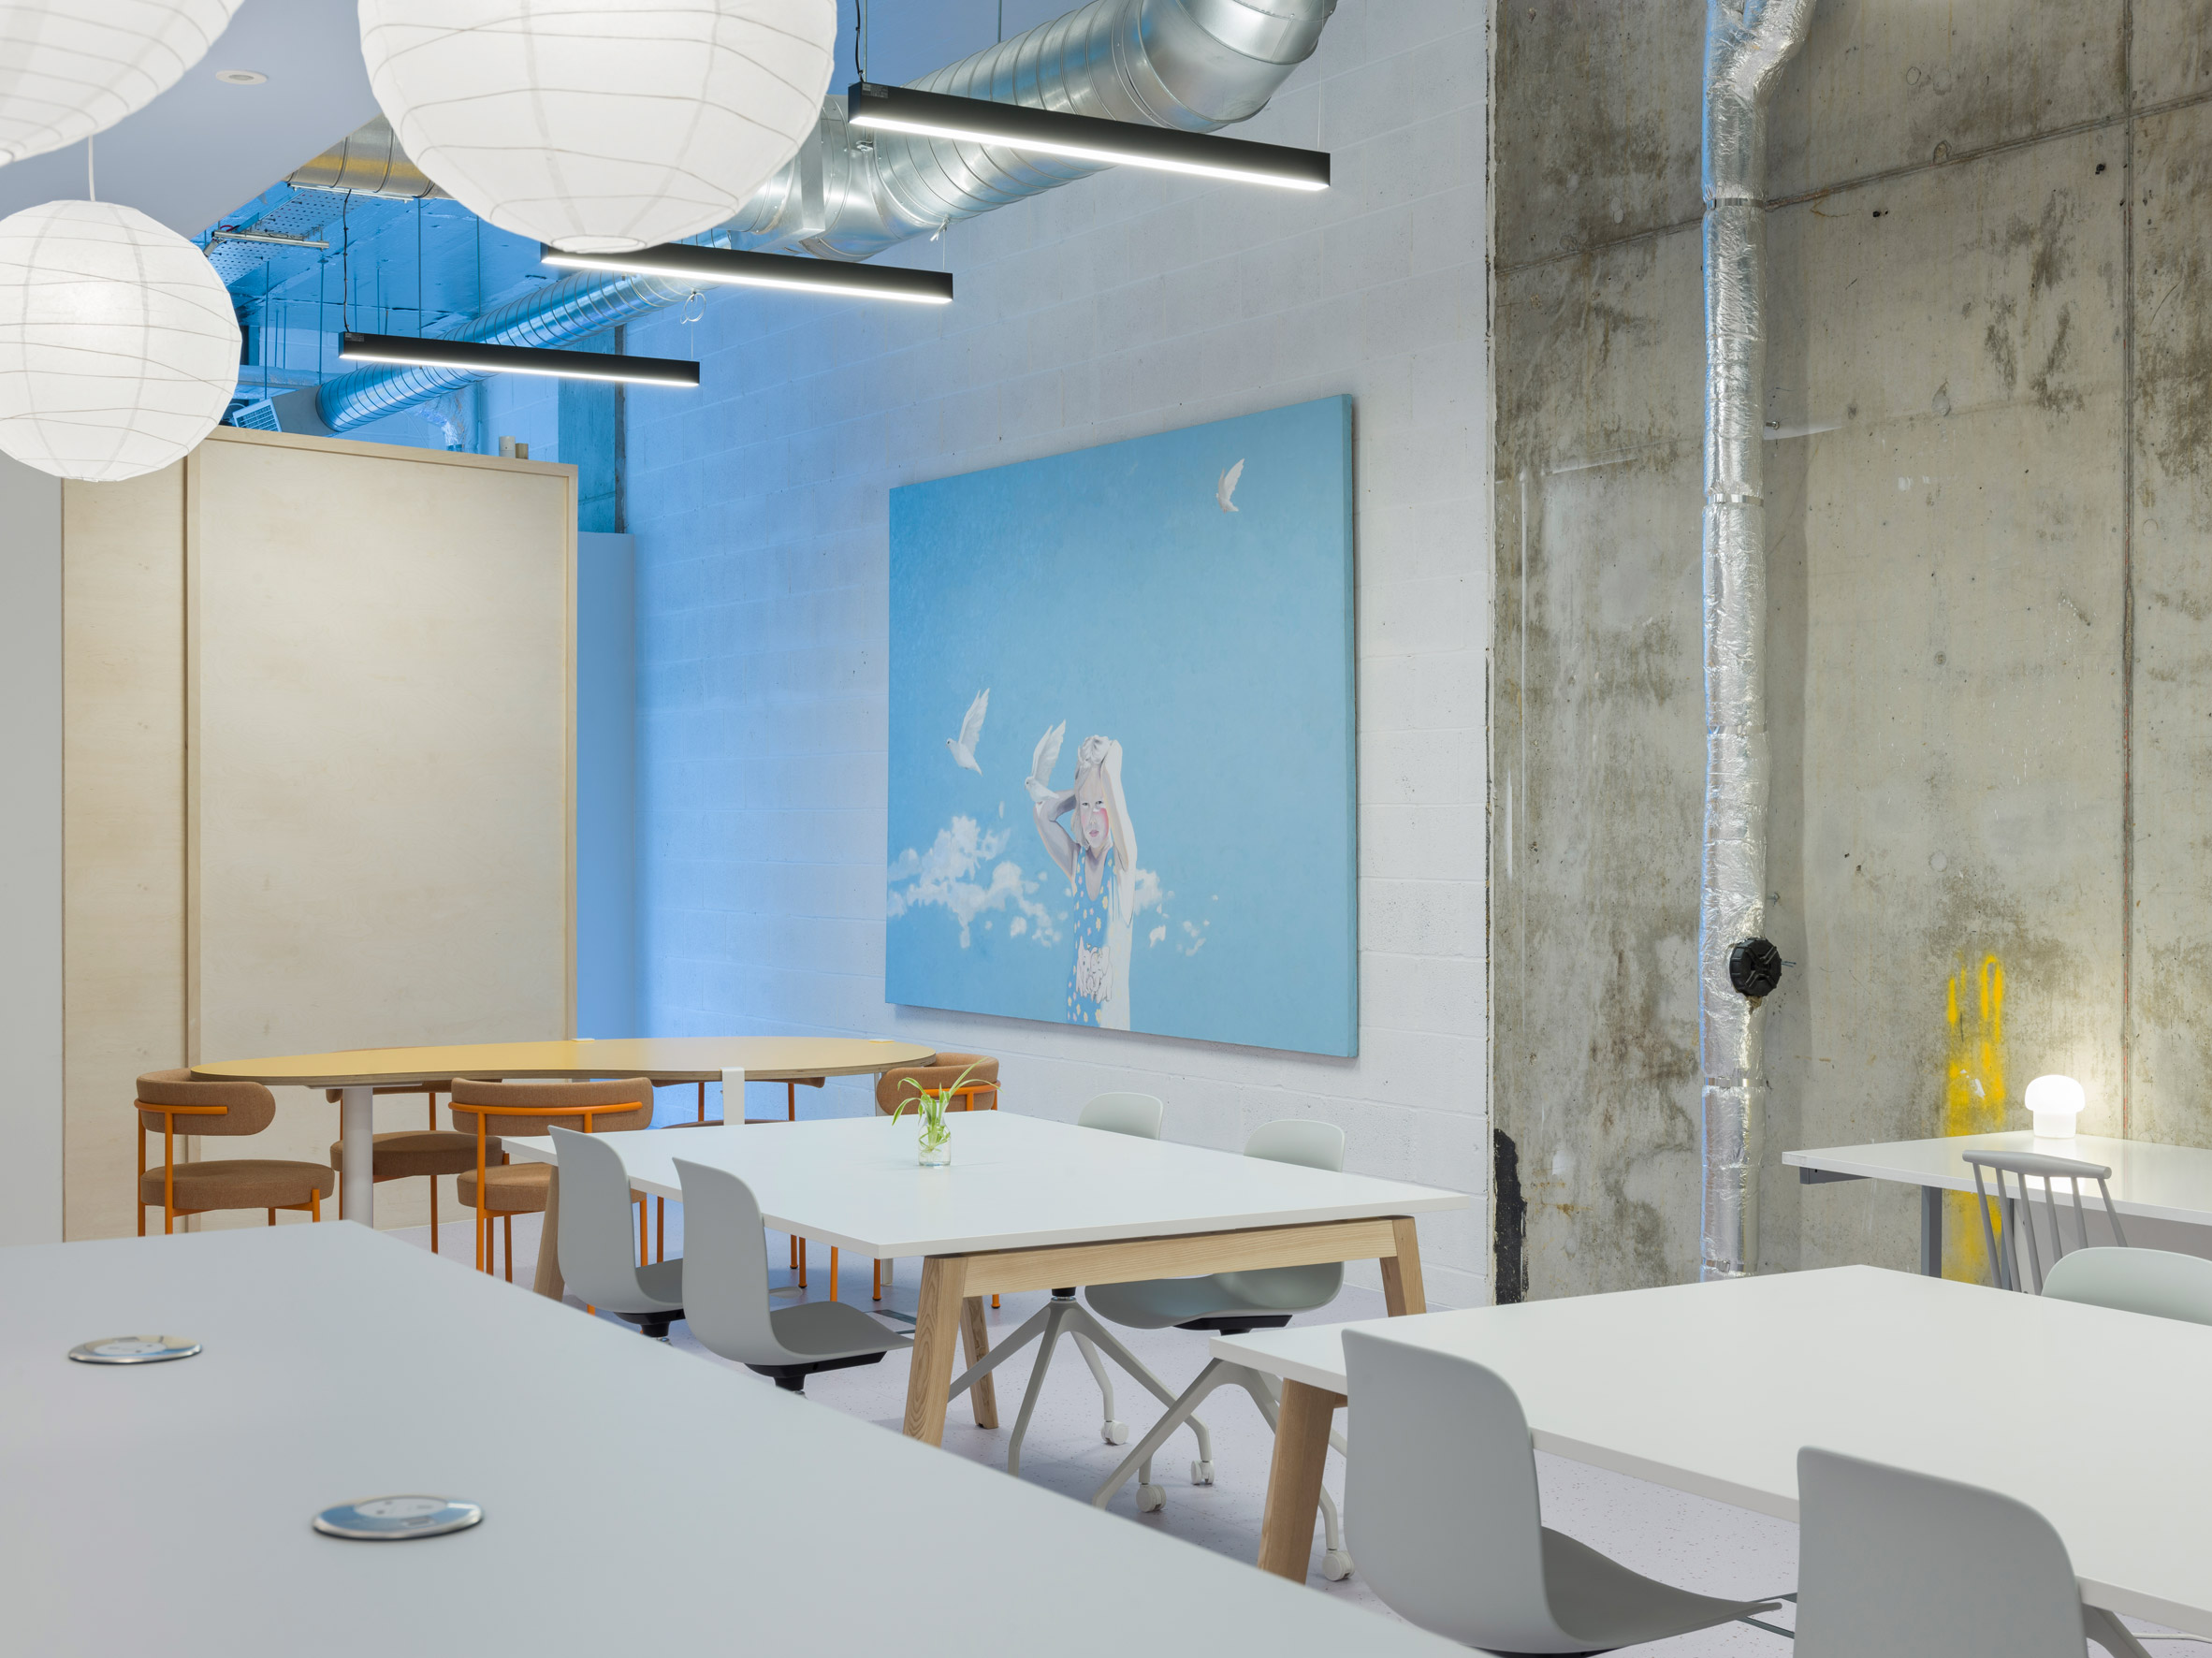 Interiors of co-working office by Caro Lundin with large tables surrounded by chairs in front of a blue artwork